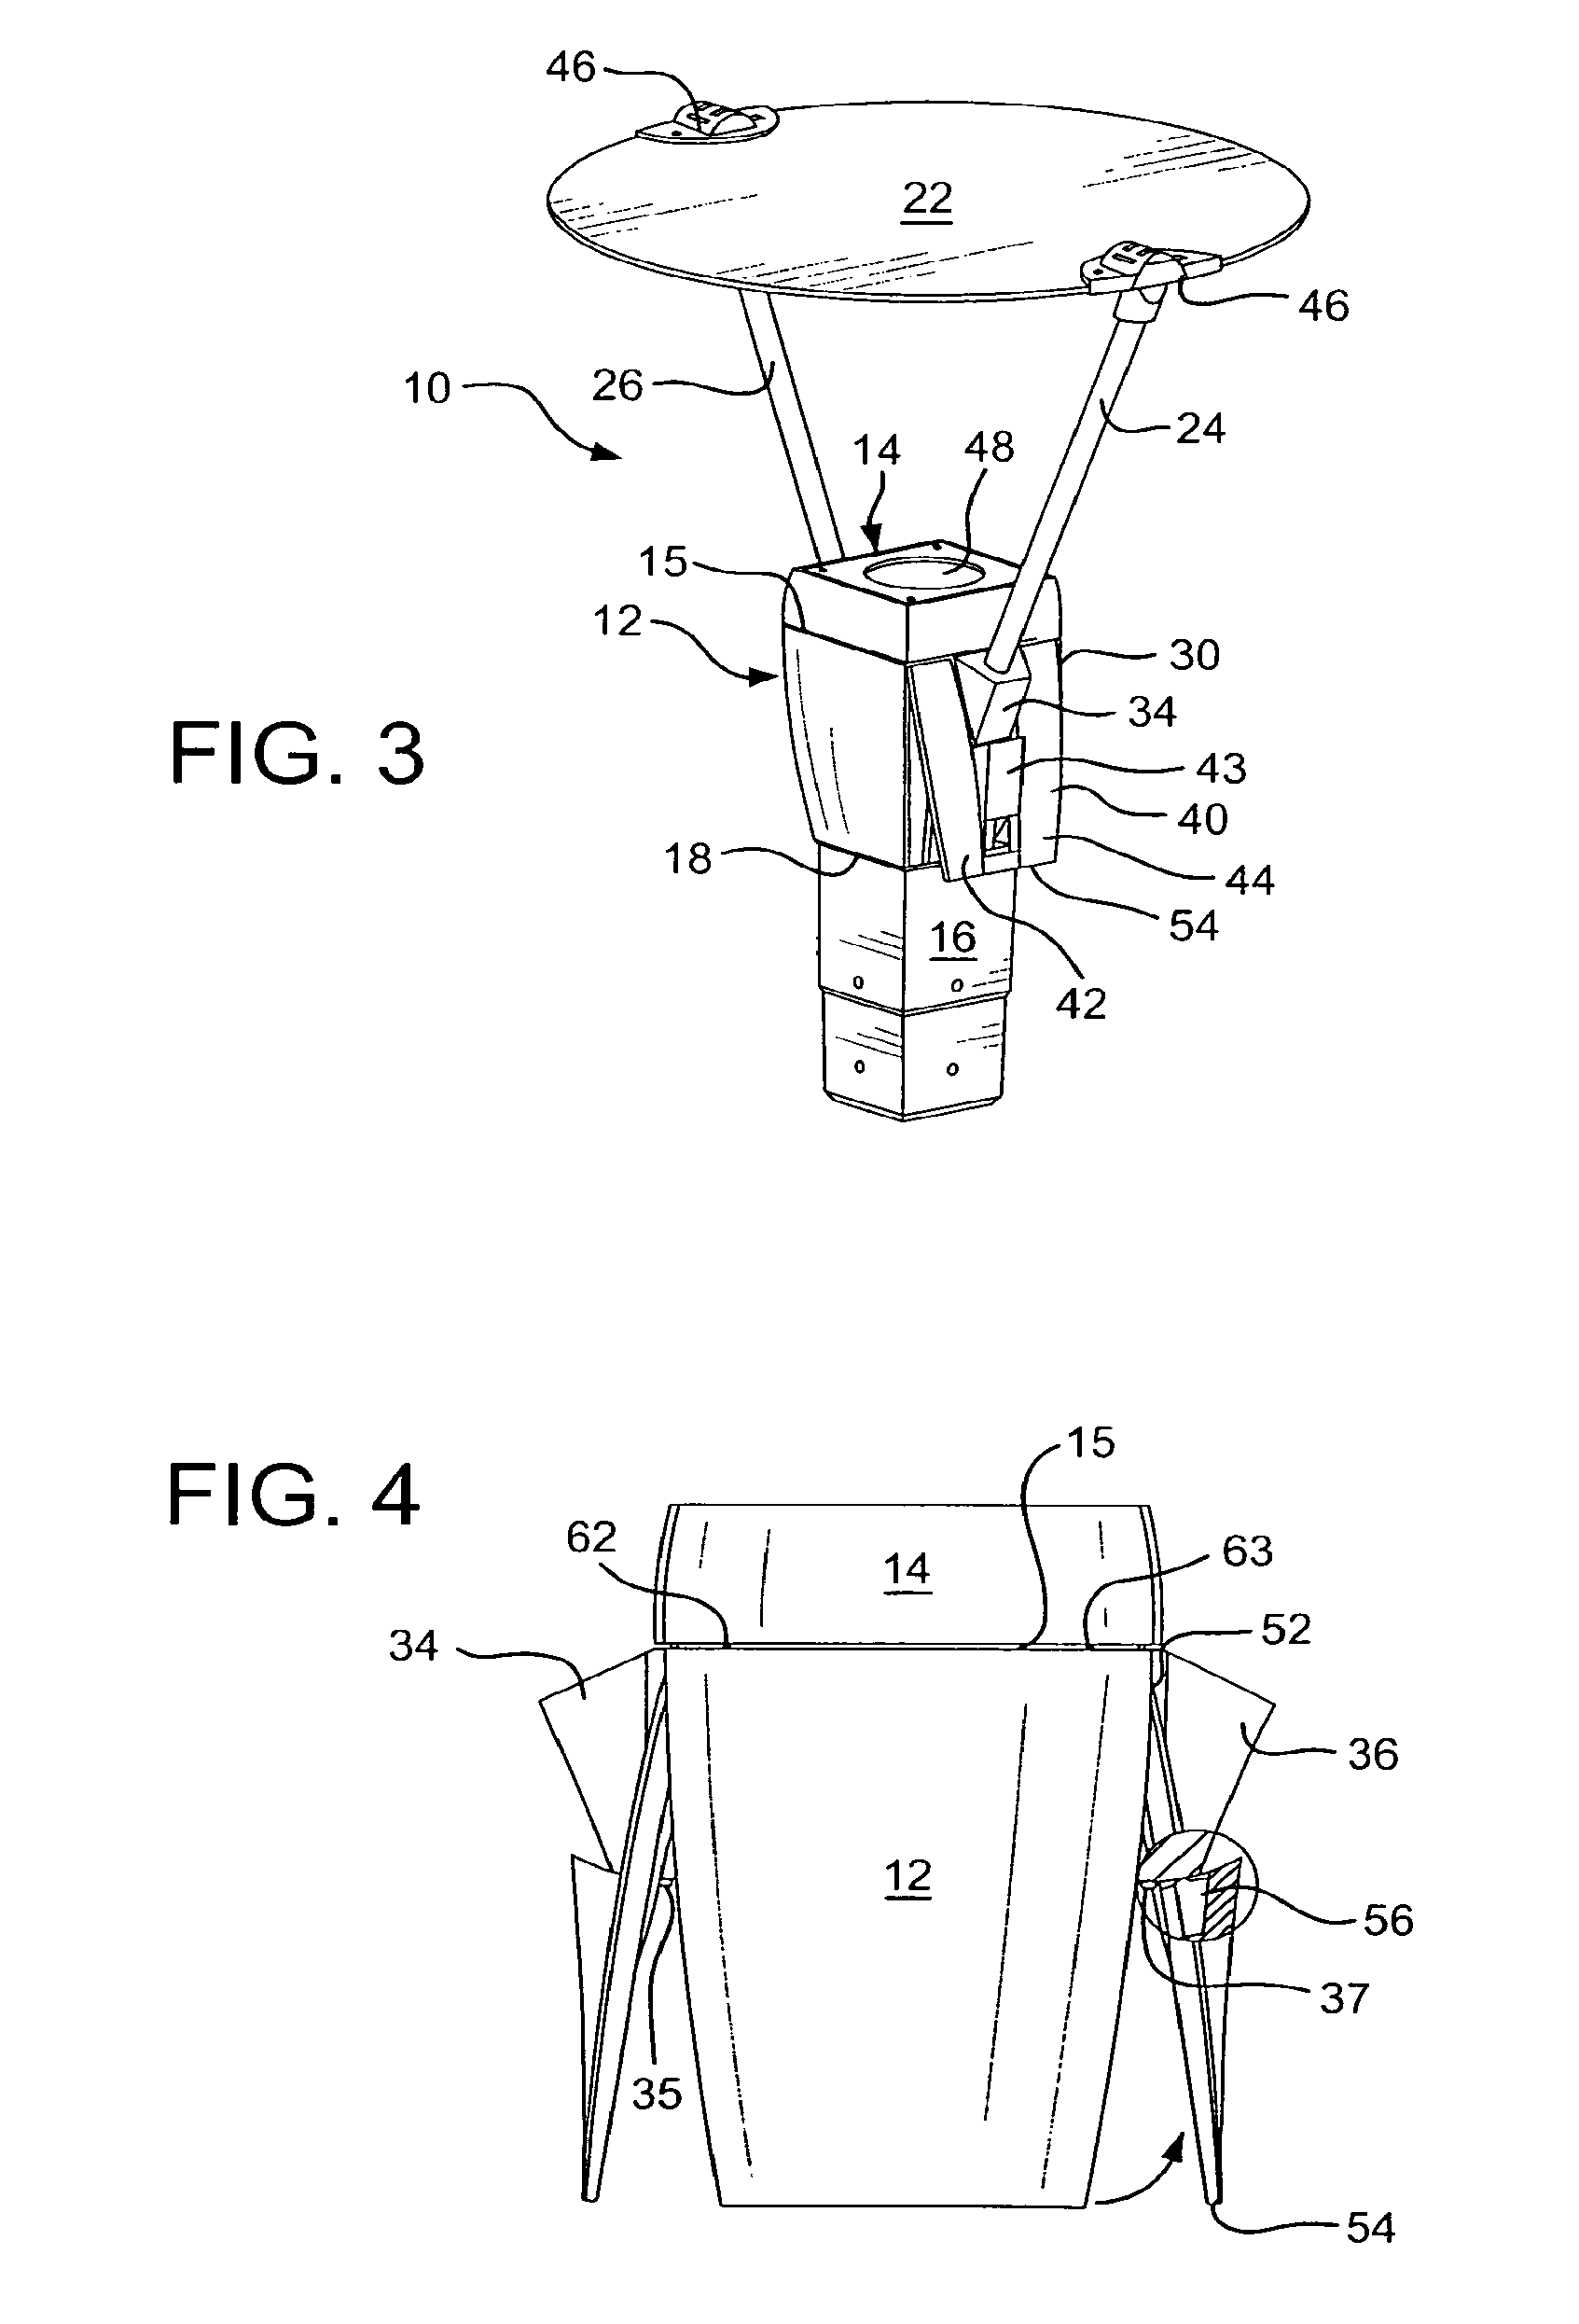 Lighting fixture having a latching system and an auxiliary emergency light